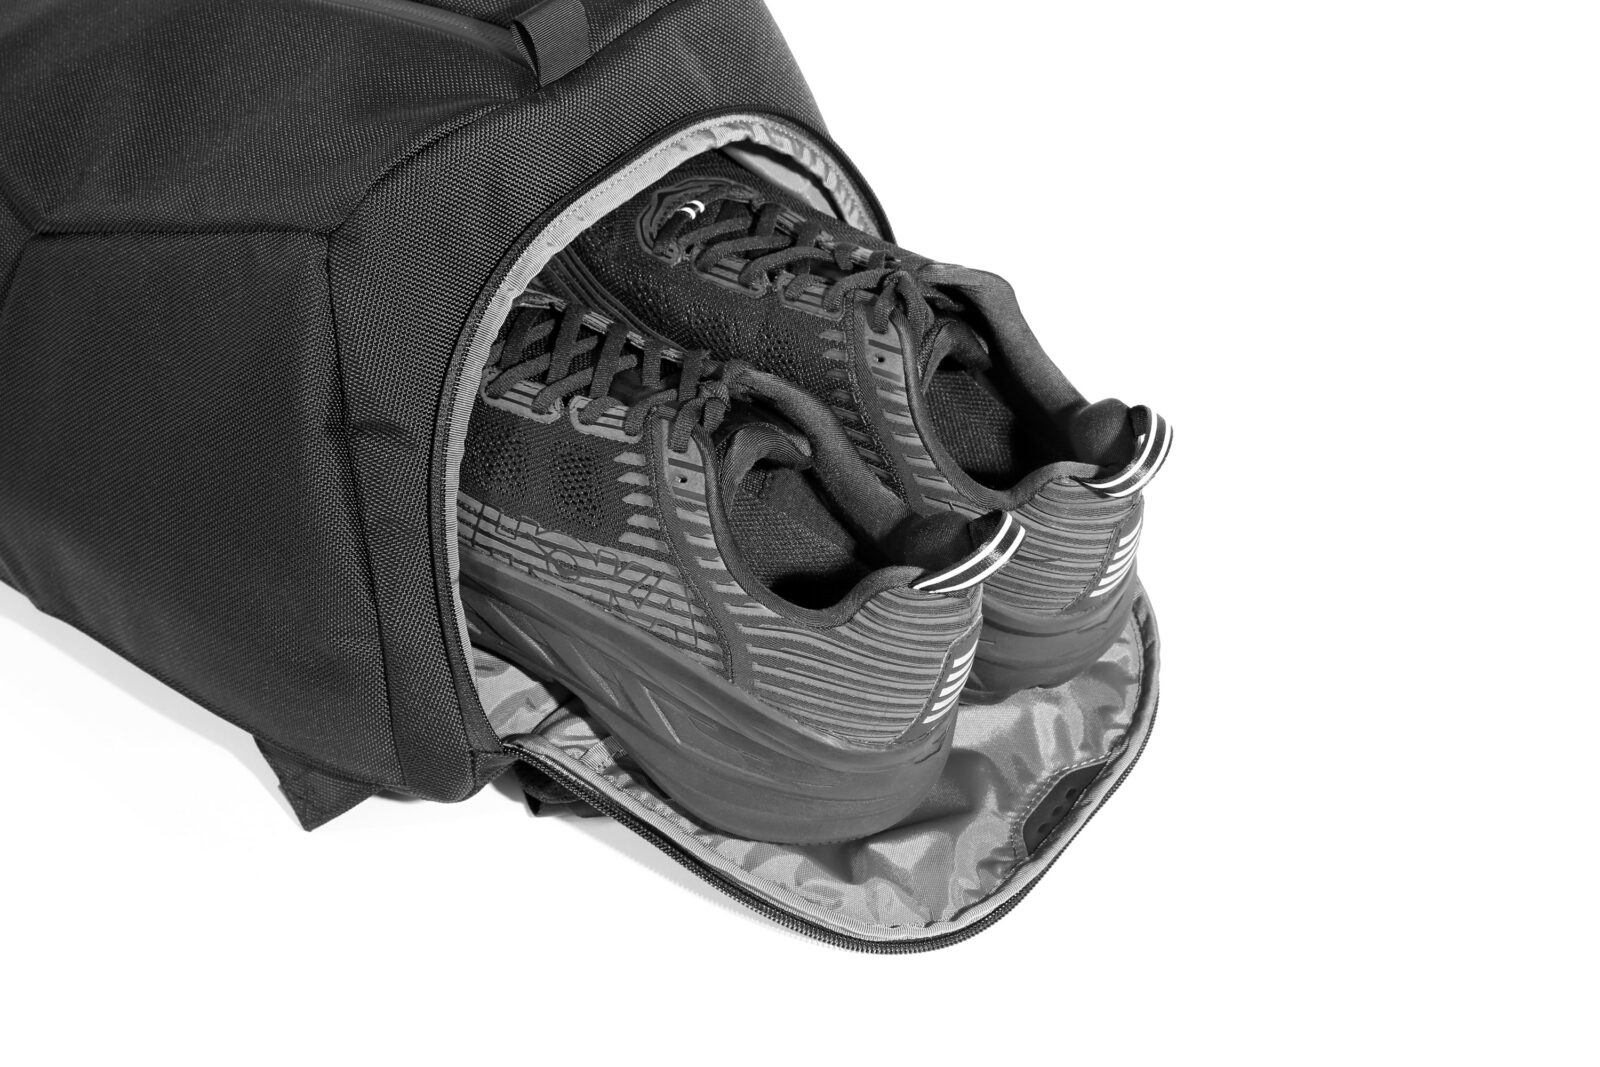 Aer Fit Pack 3: A bottom compartment holds gym shoes.